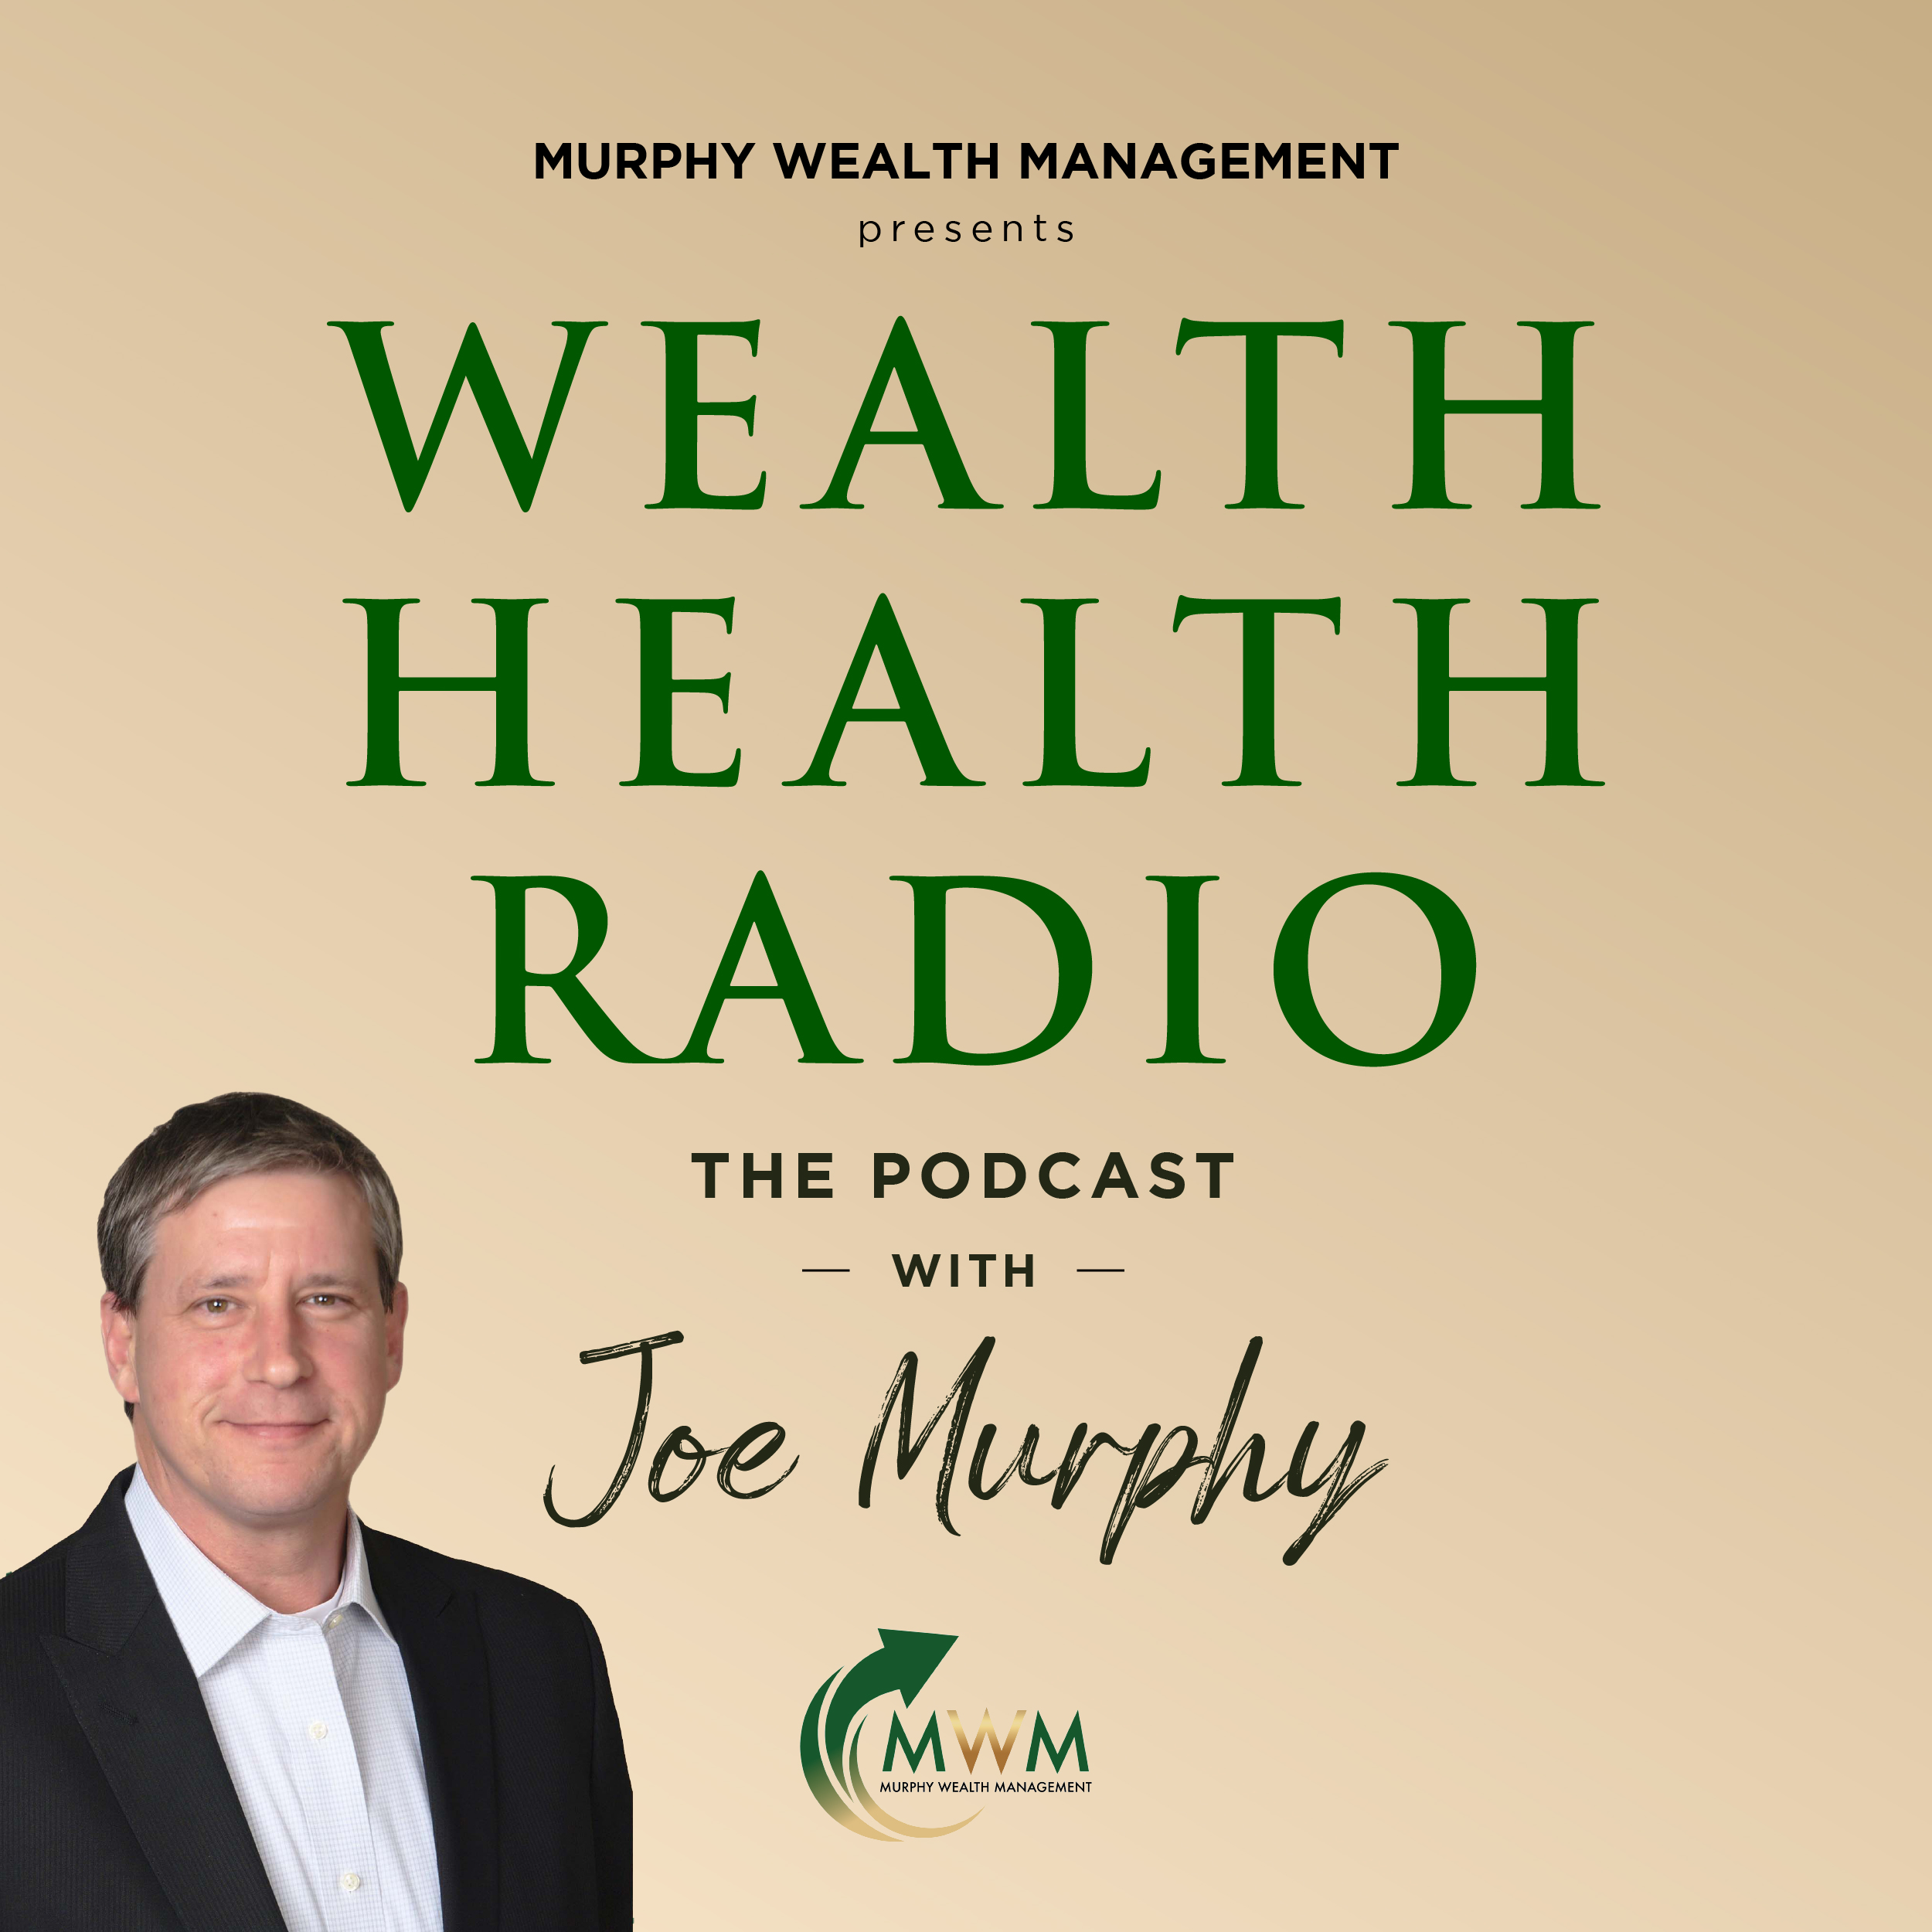 Wealth Health Radio Joe Murphy offers some tips to help navigate your way to a successful retirement despite all that’s going on.